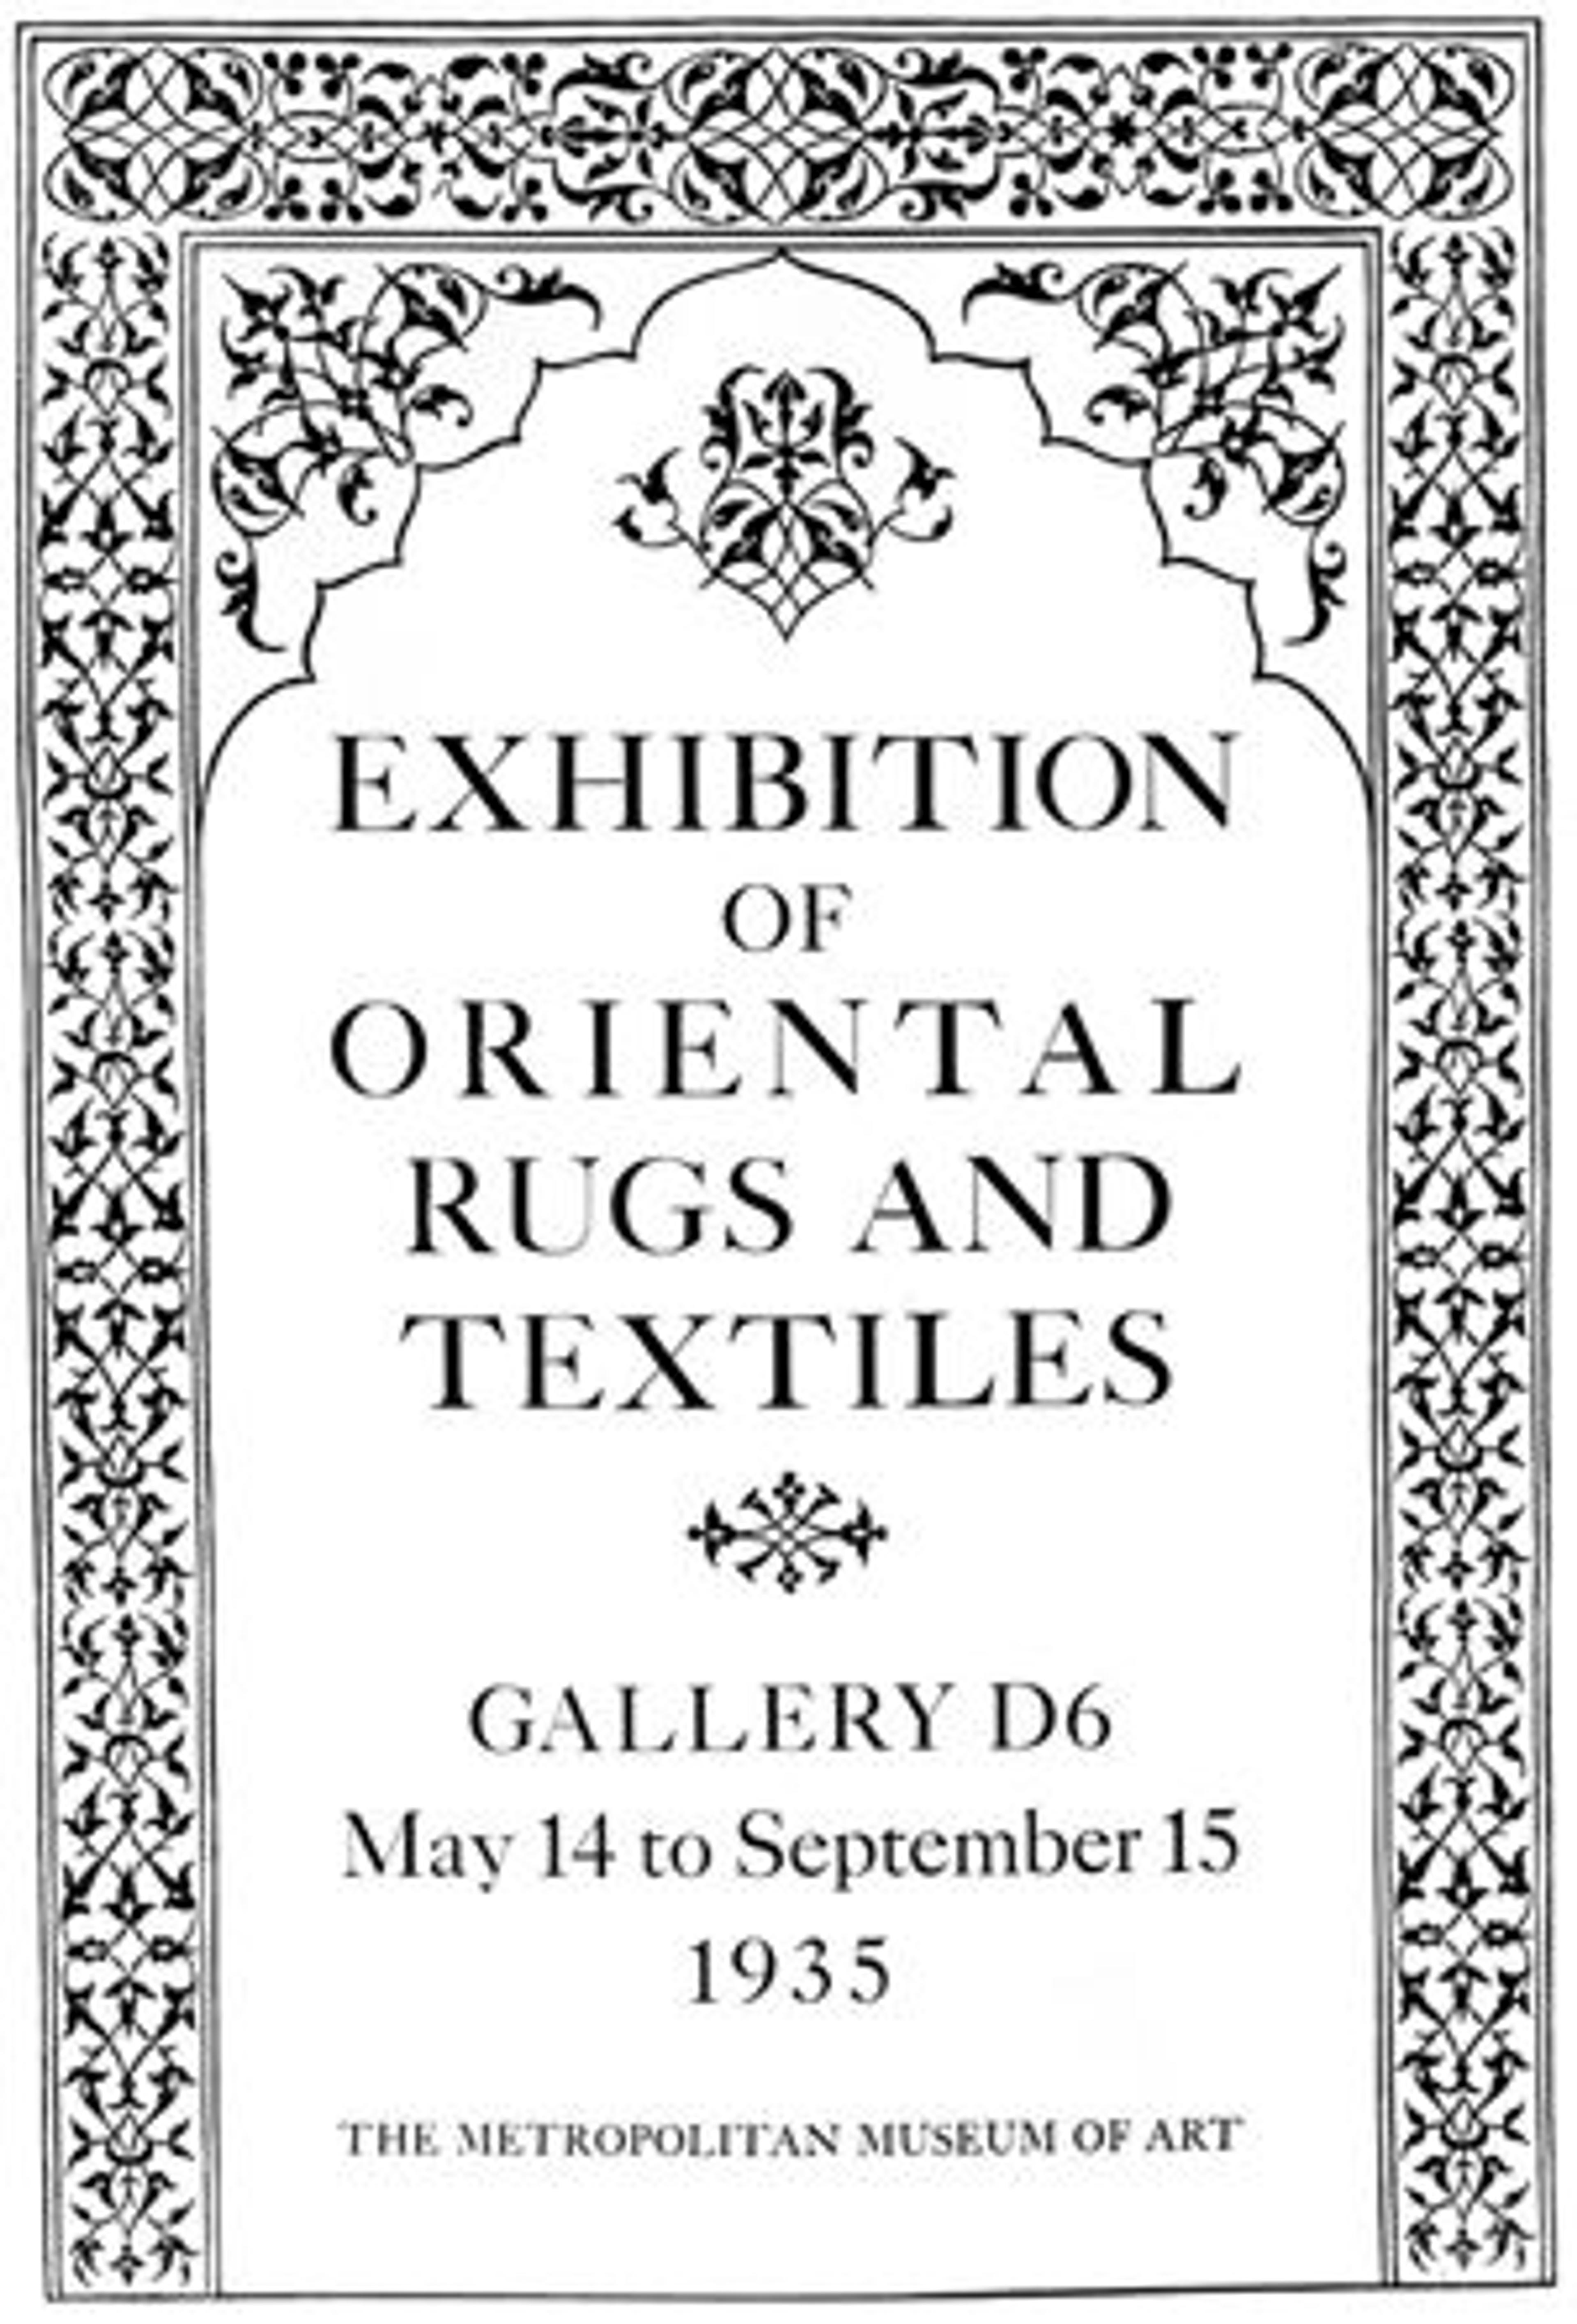 "Oriental Rugs and Textiles" Exhibition Poster